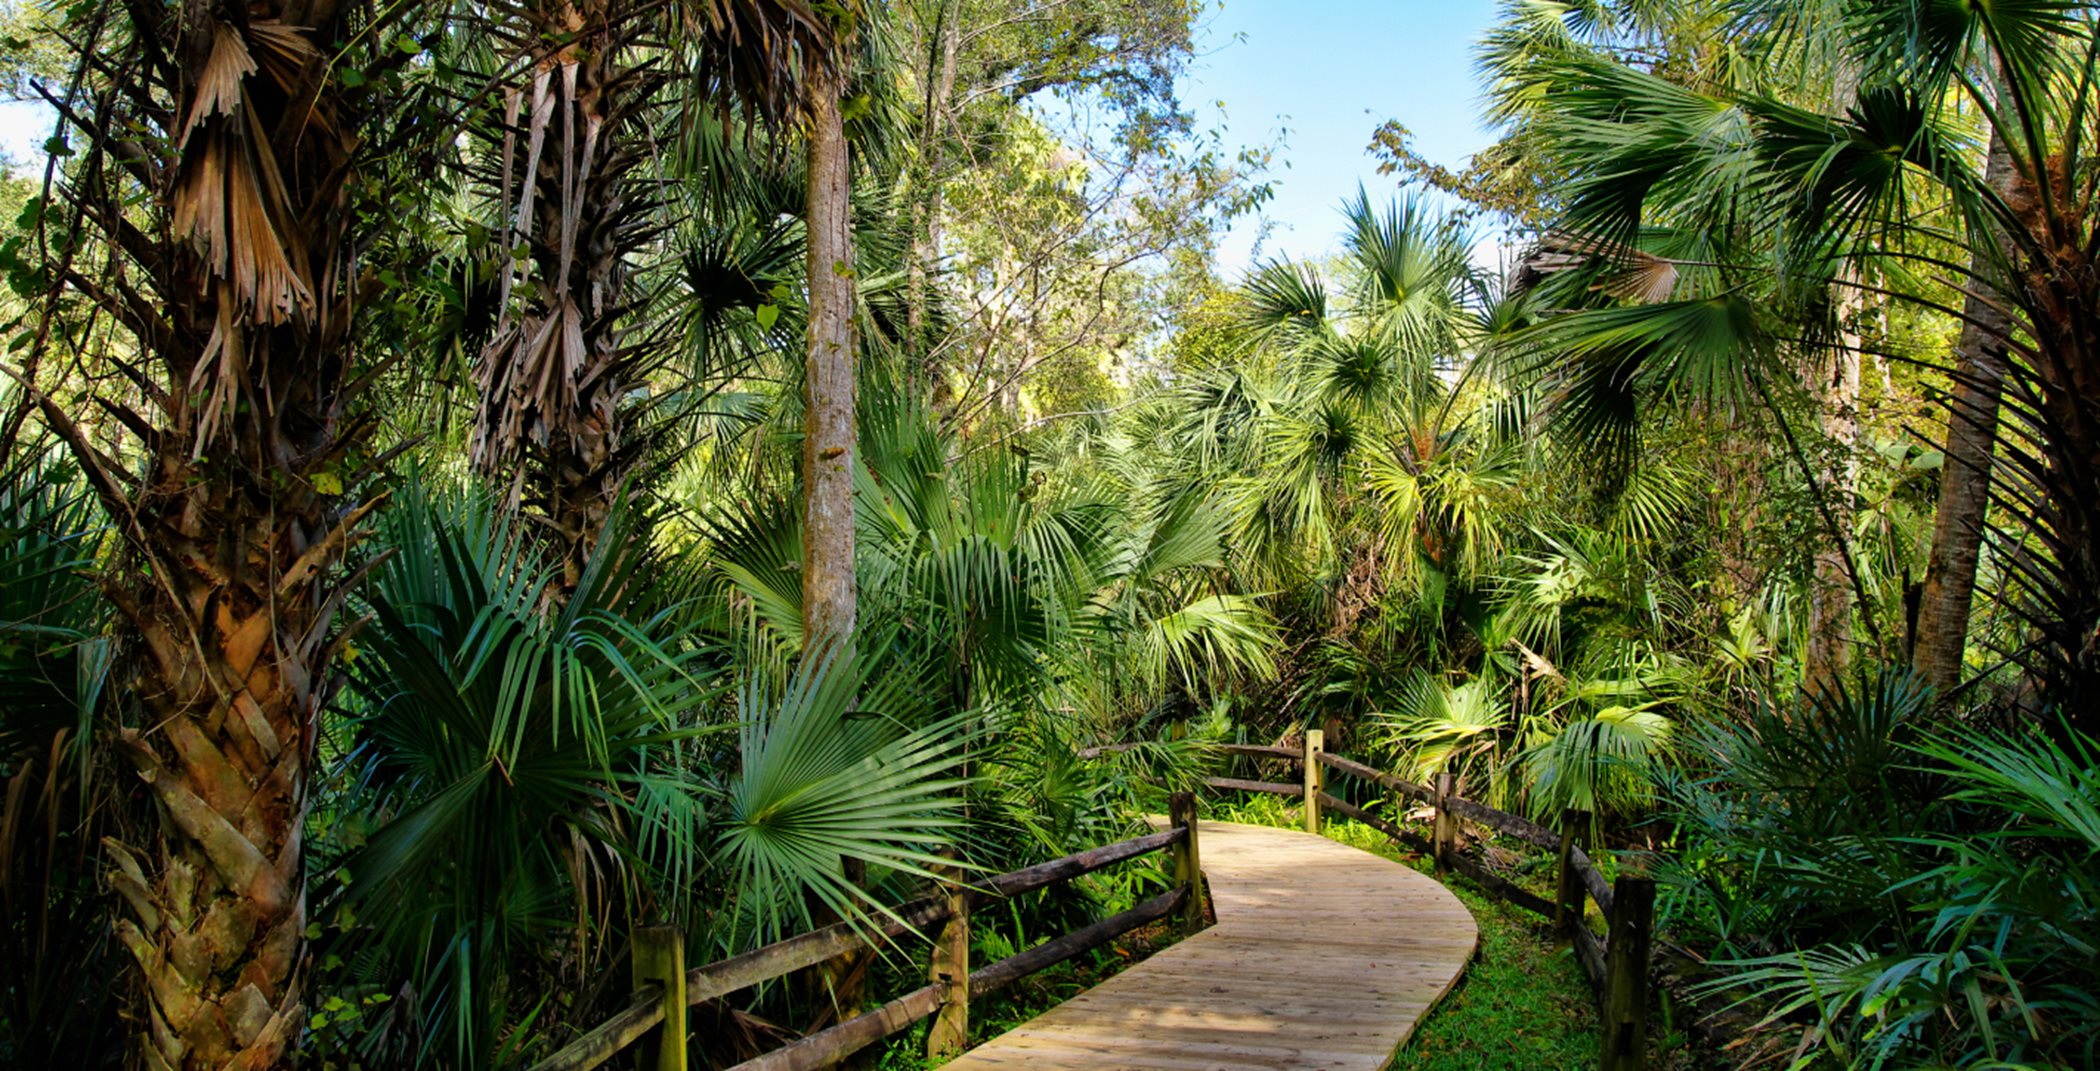 A walking trail surrounded by Palm trees